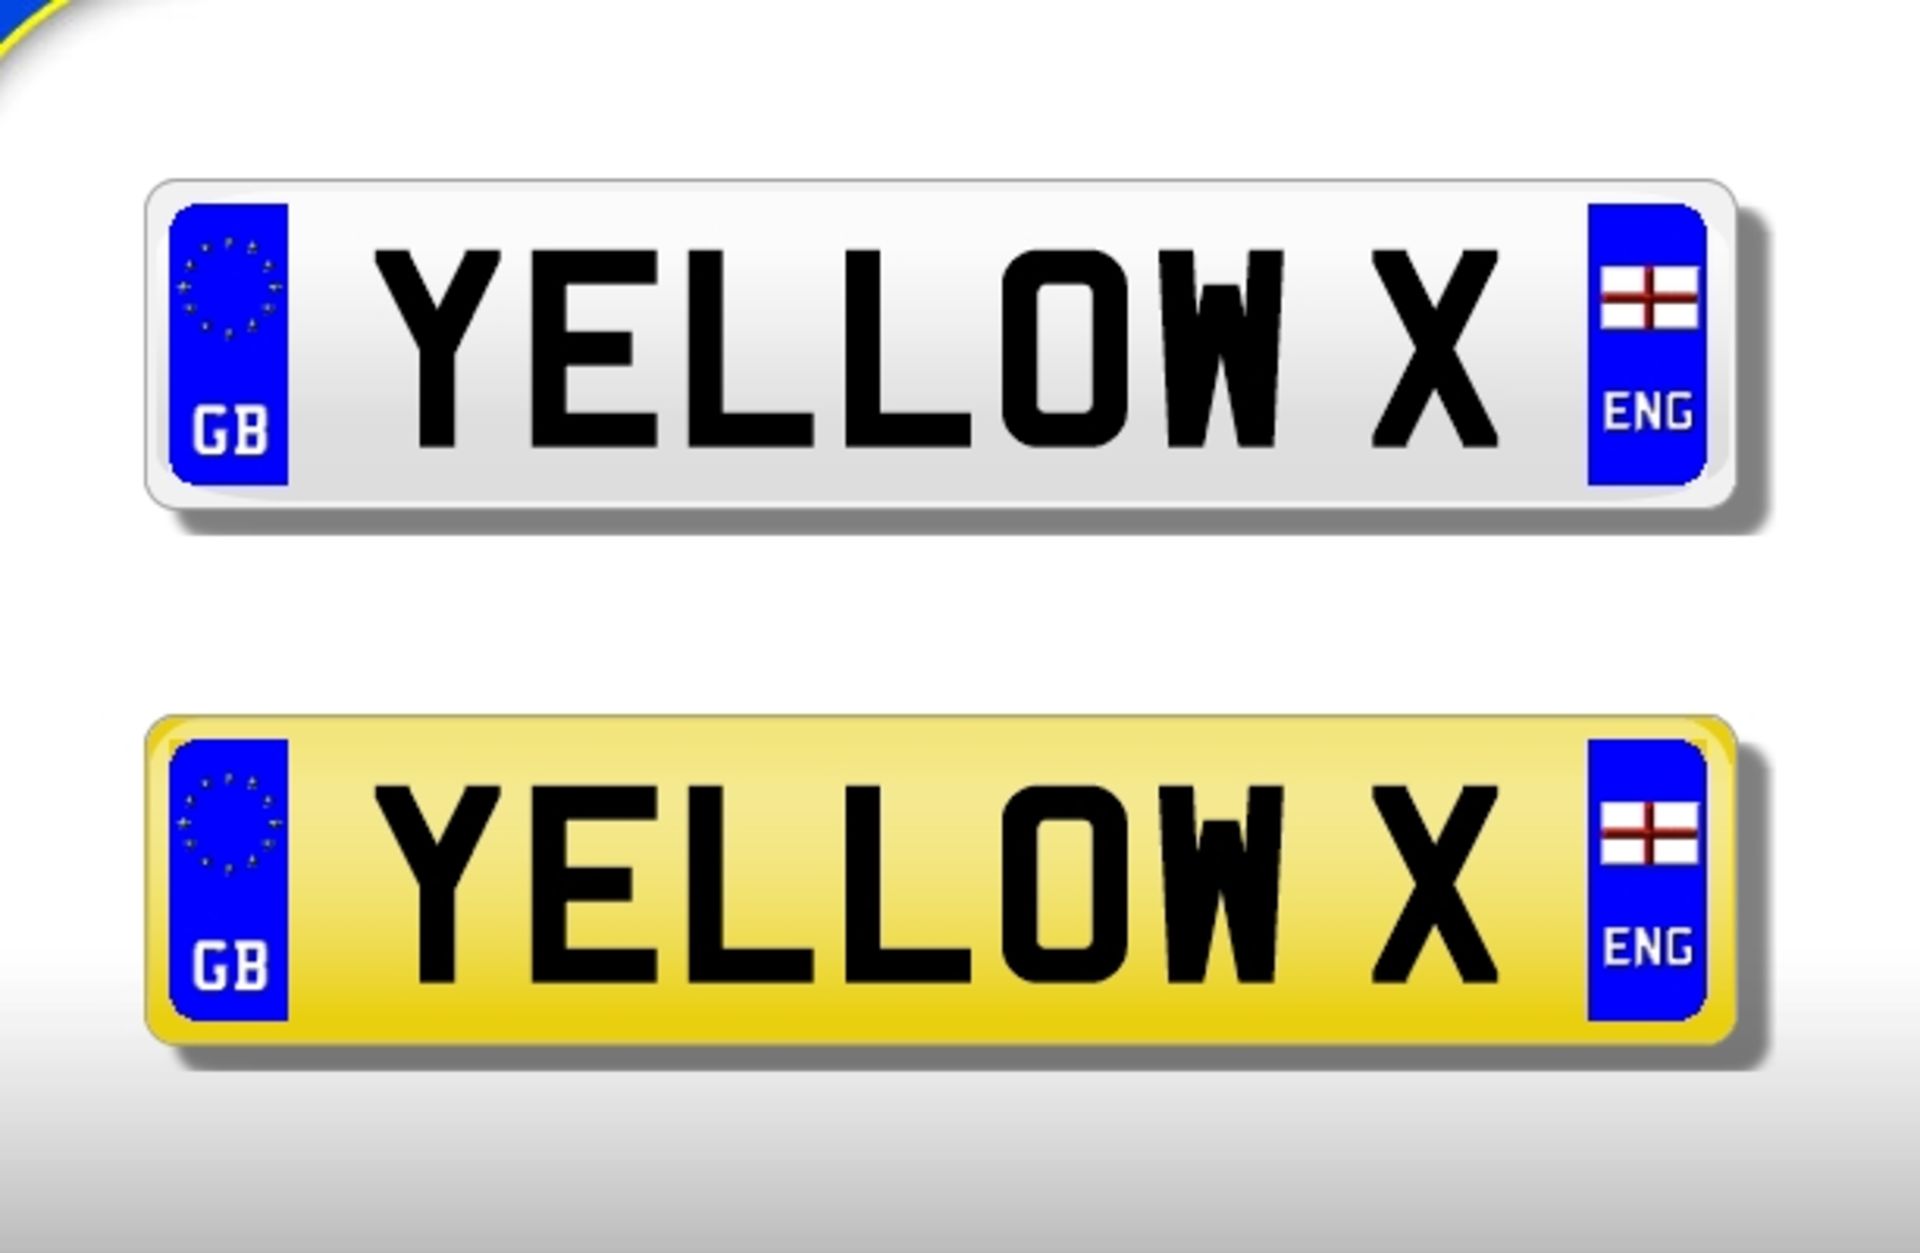 RARE OPPORTUNITY TO PURCHASE NUMBER PLATE "YELLOW X" ON RETENTION. NO VAT !!